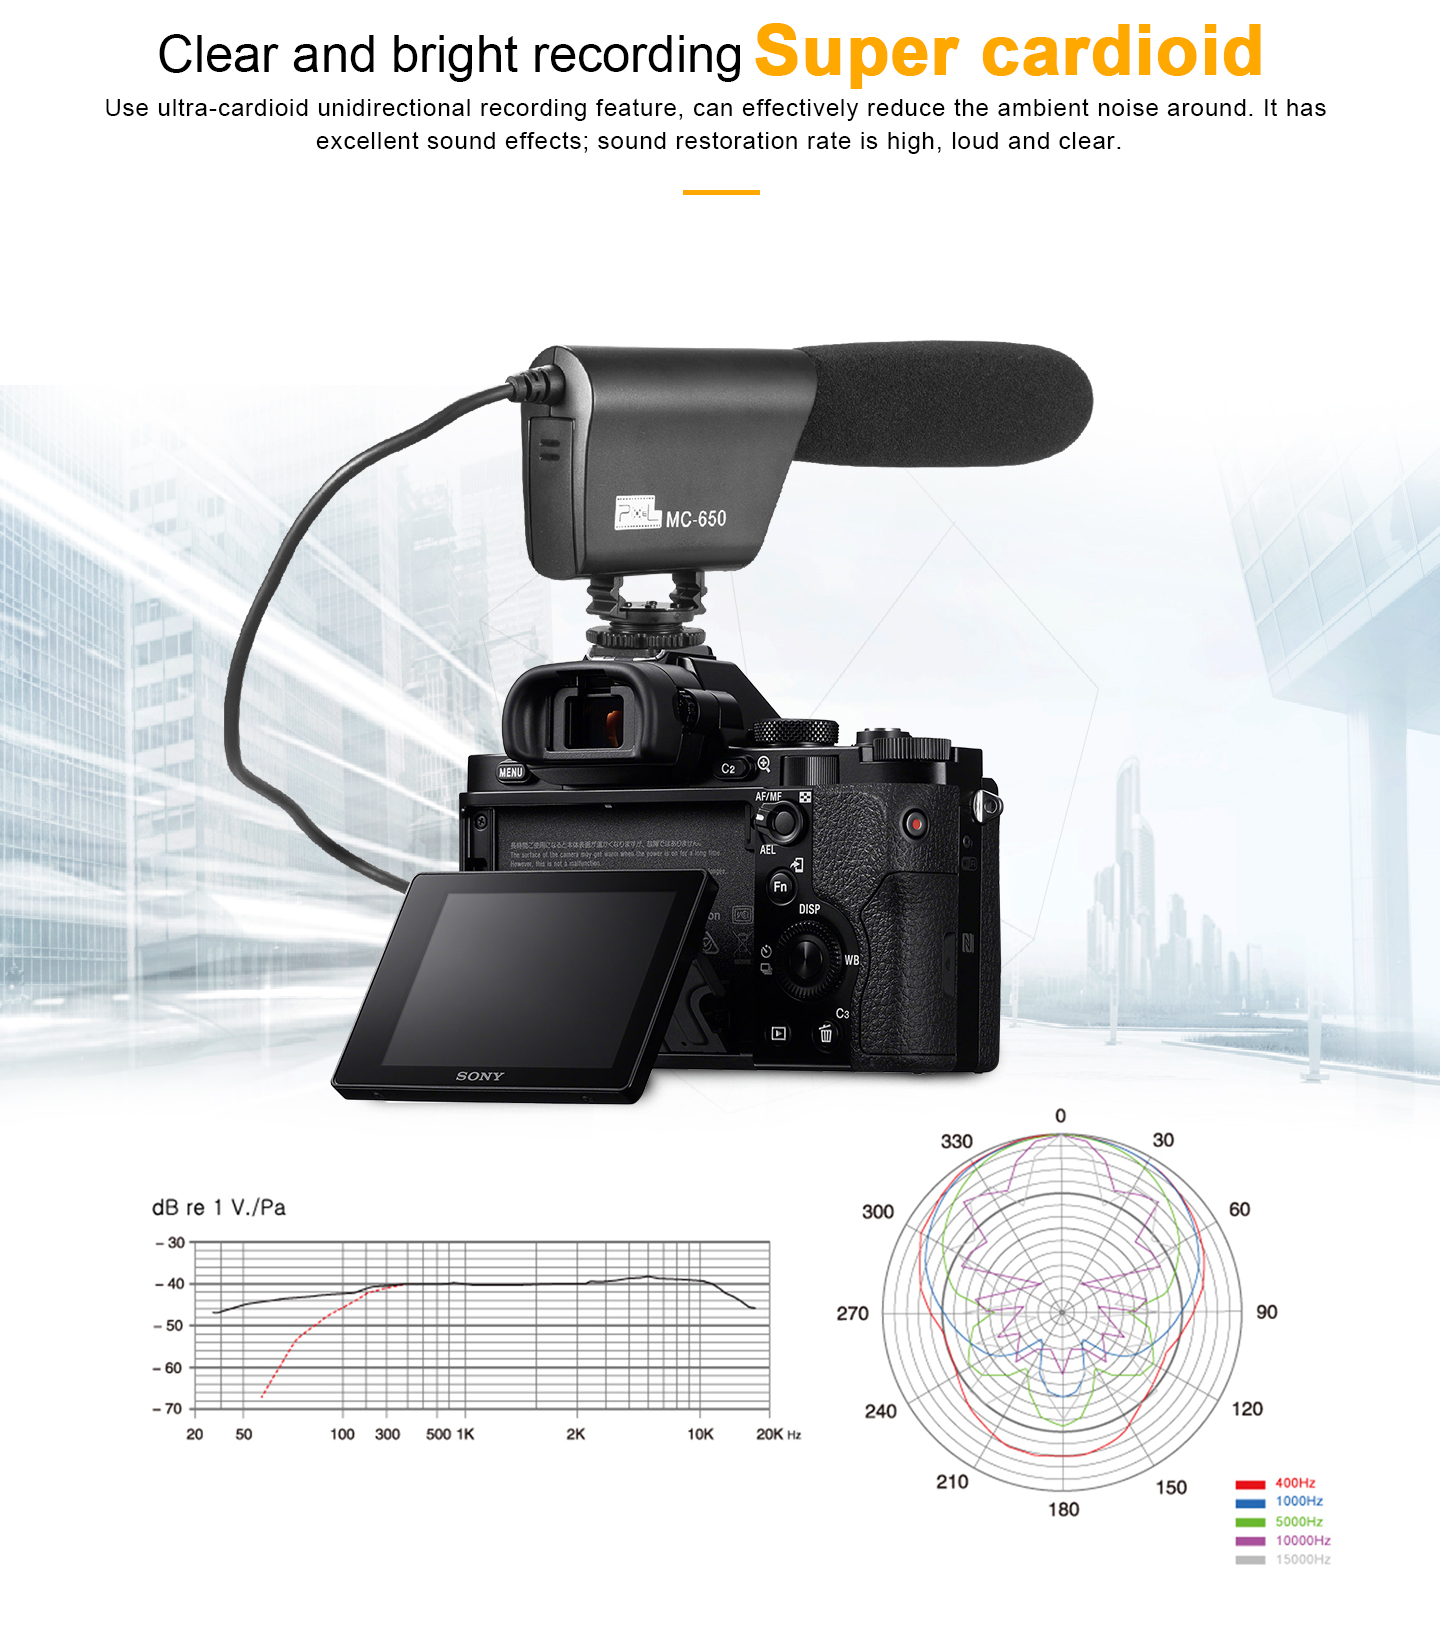 Clear and bright recording Super cardioid